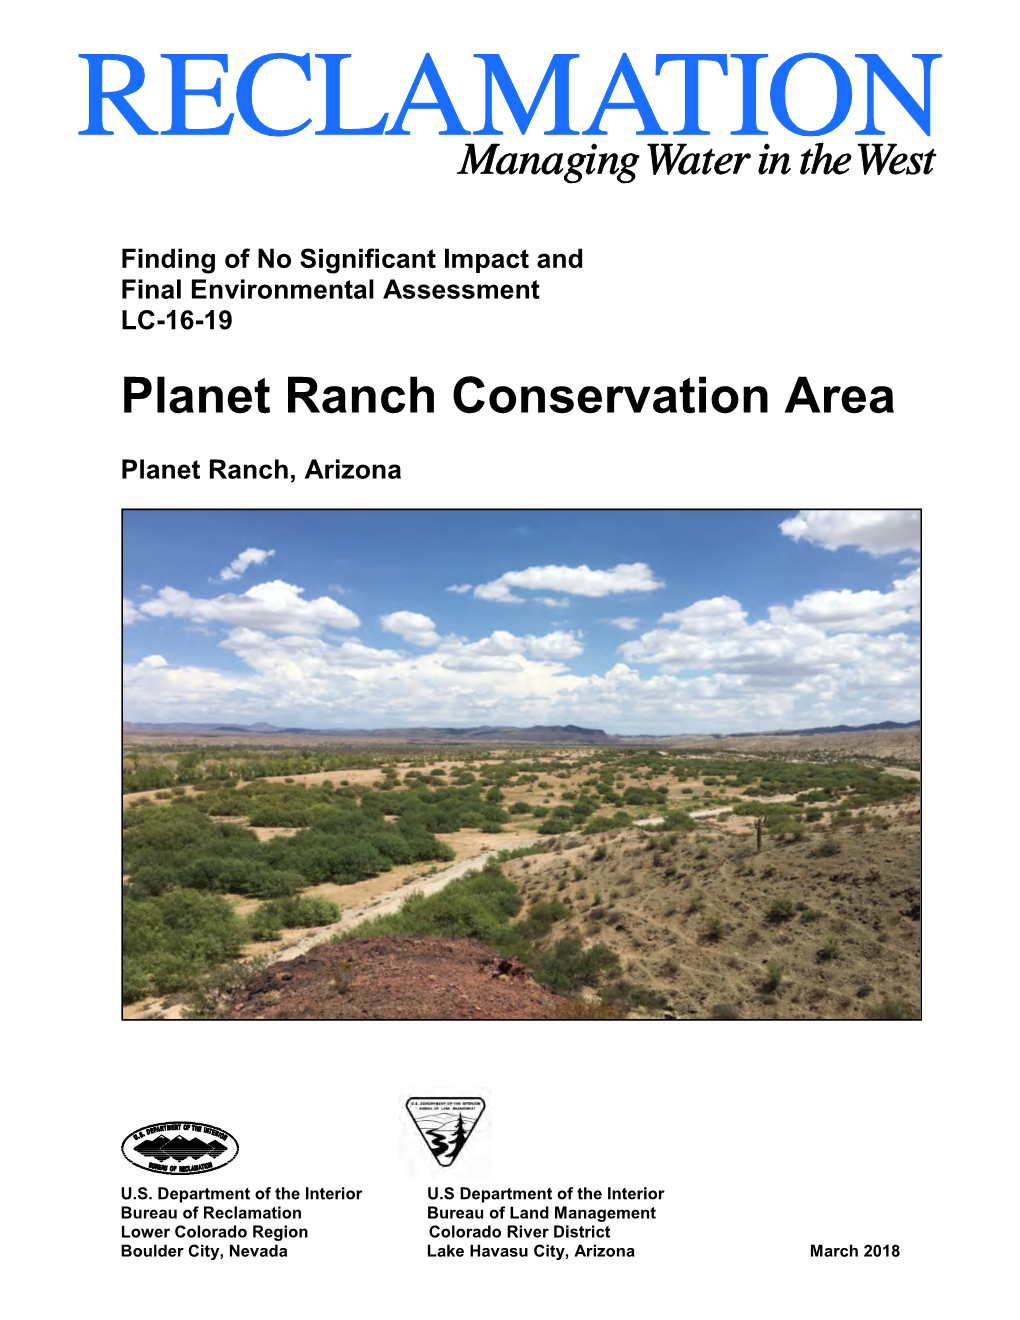 Planet Ranch Conservation Area EA and FONSI